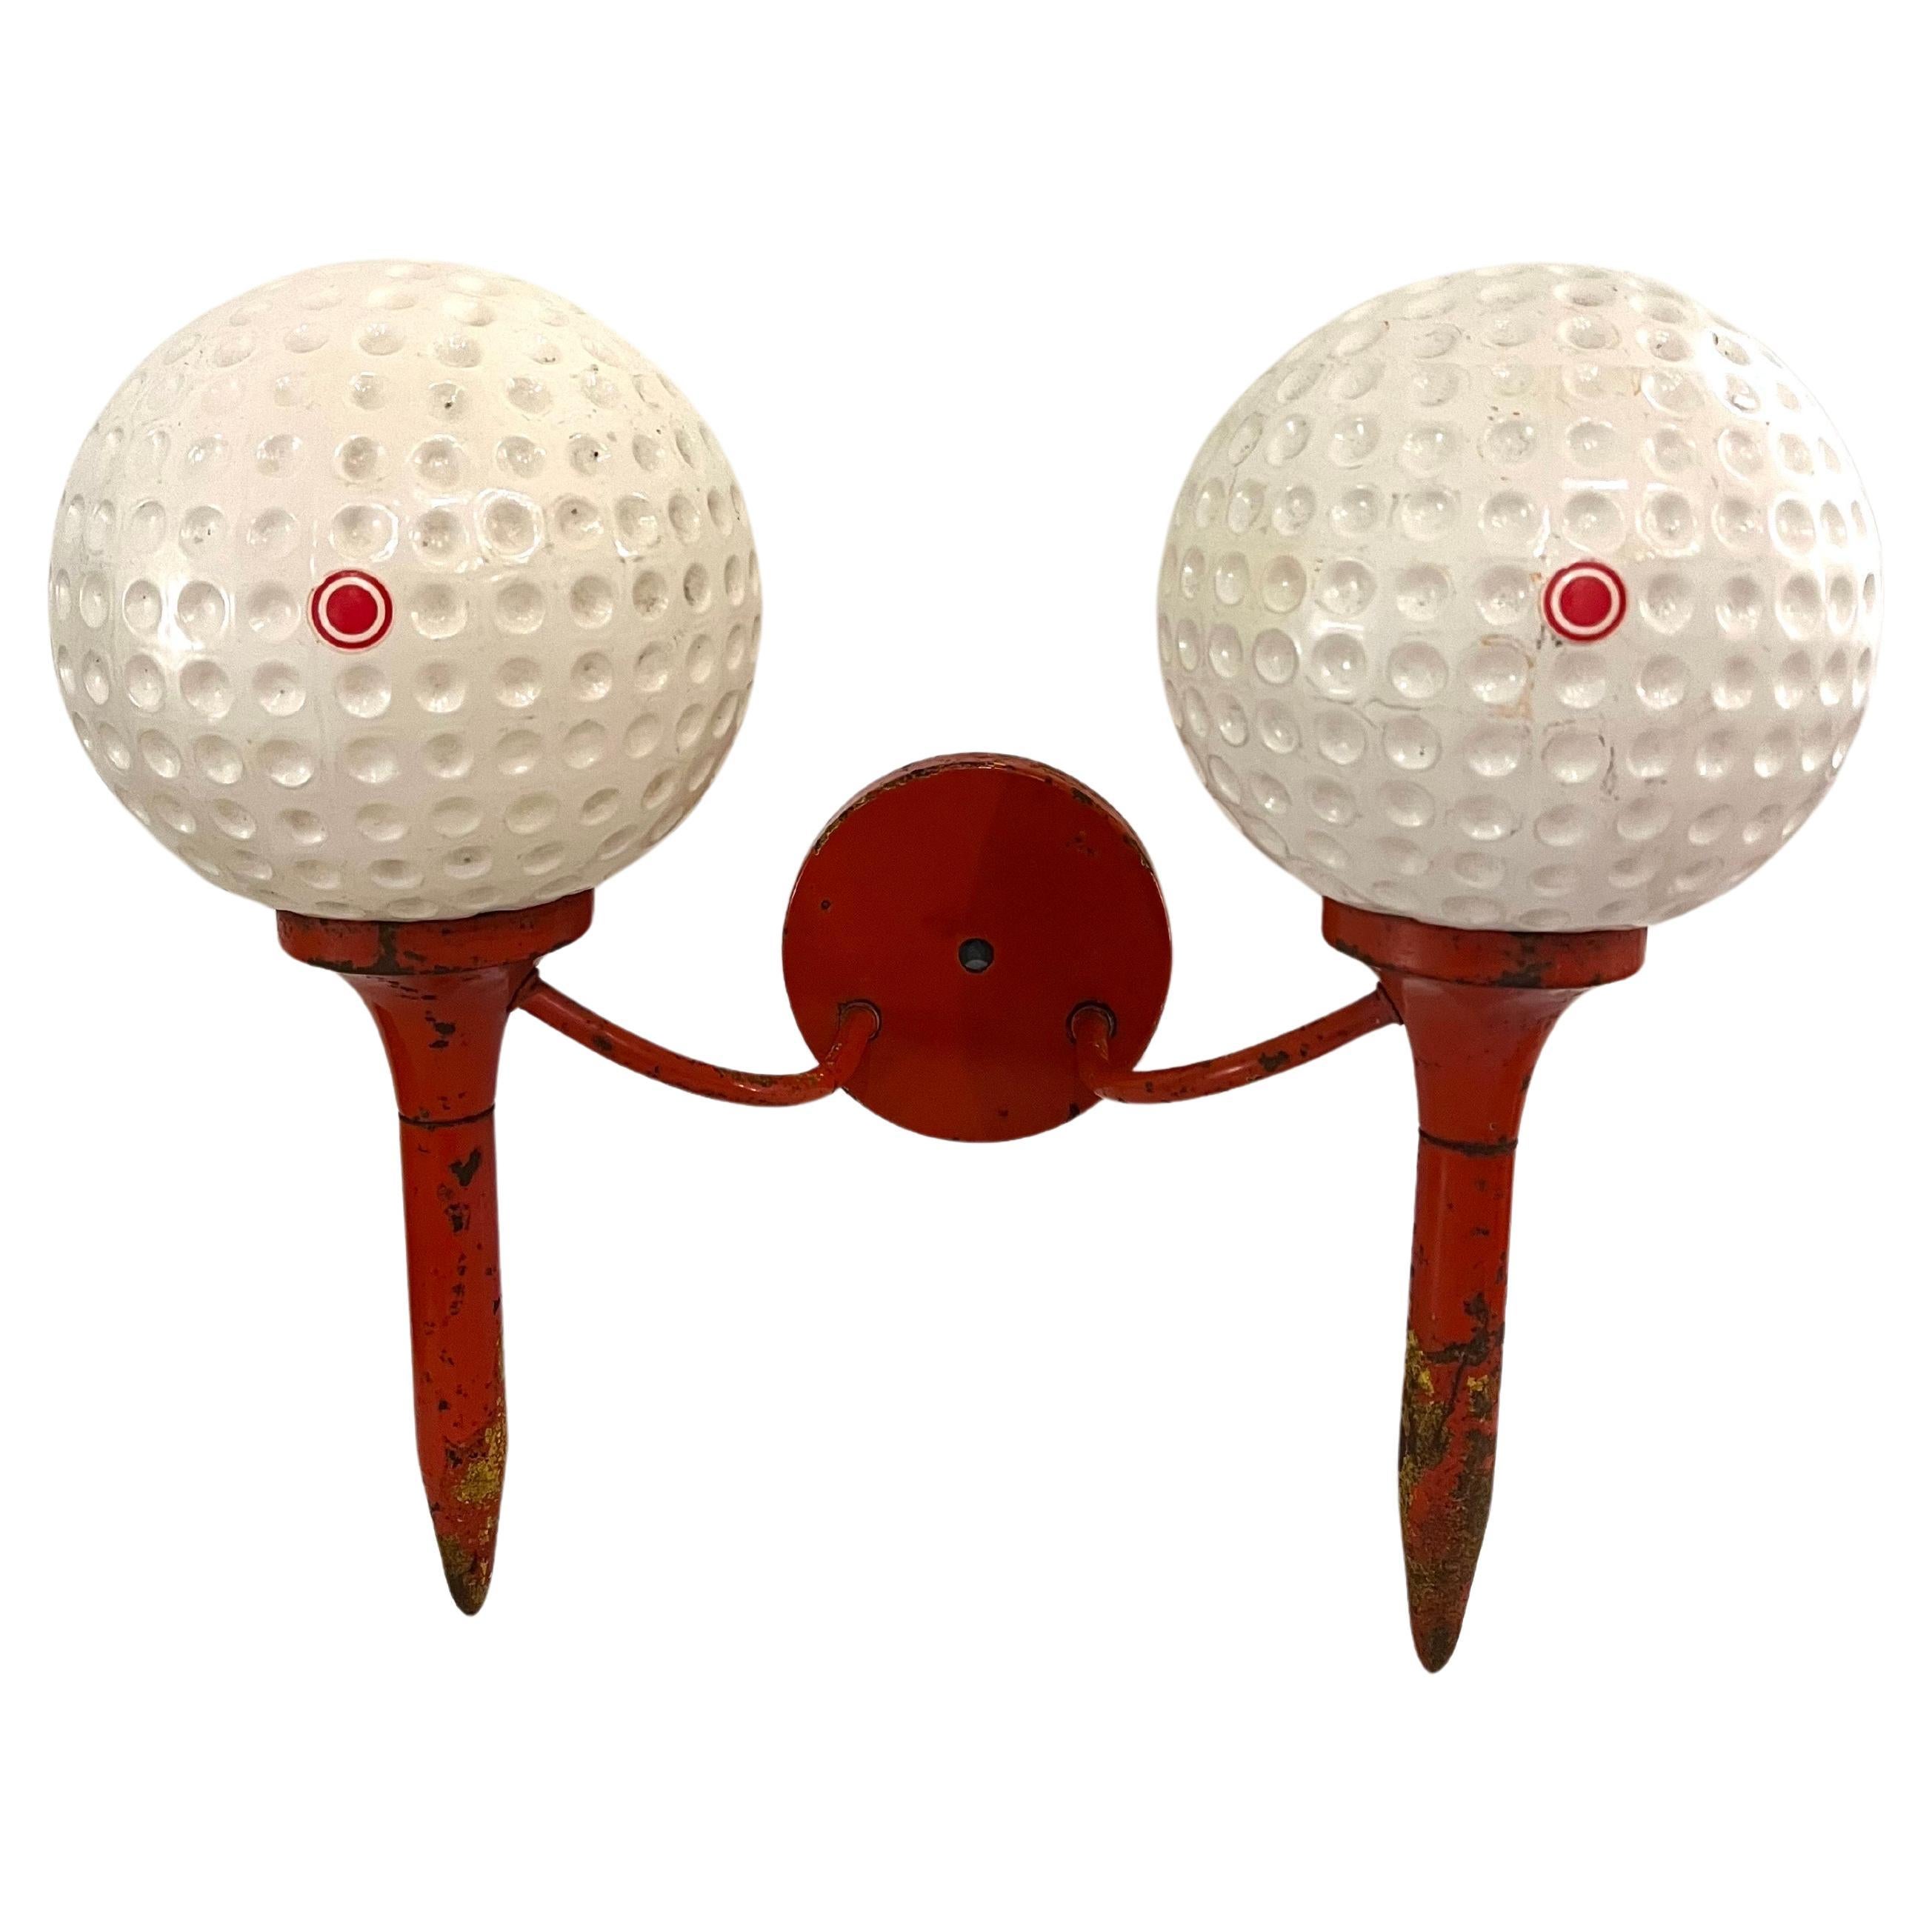 20th Century Whimsical Rare Glass Golf Balls On Patinated Tees Wall Sconce Pop Art For Sale